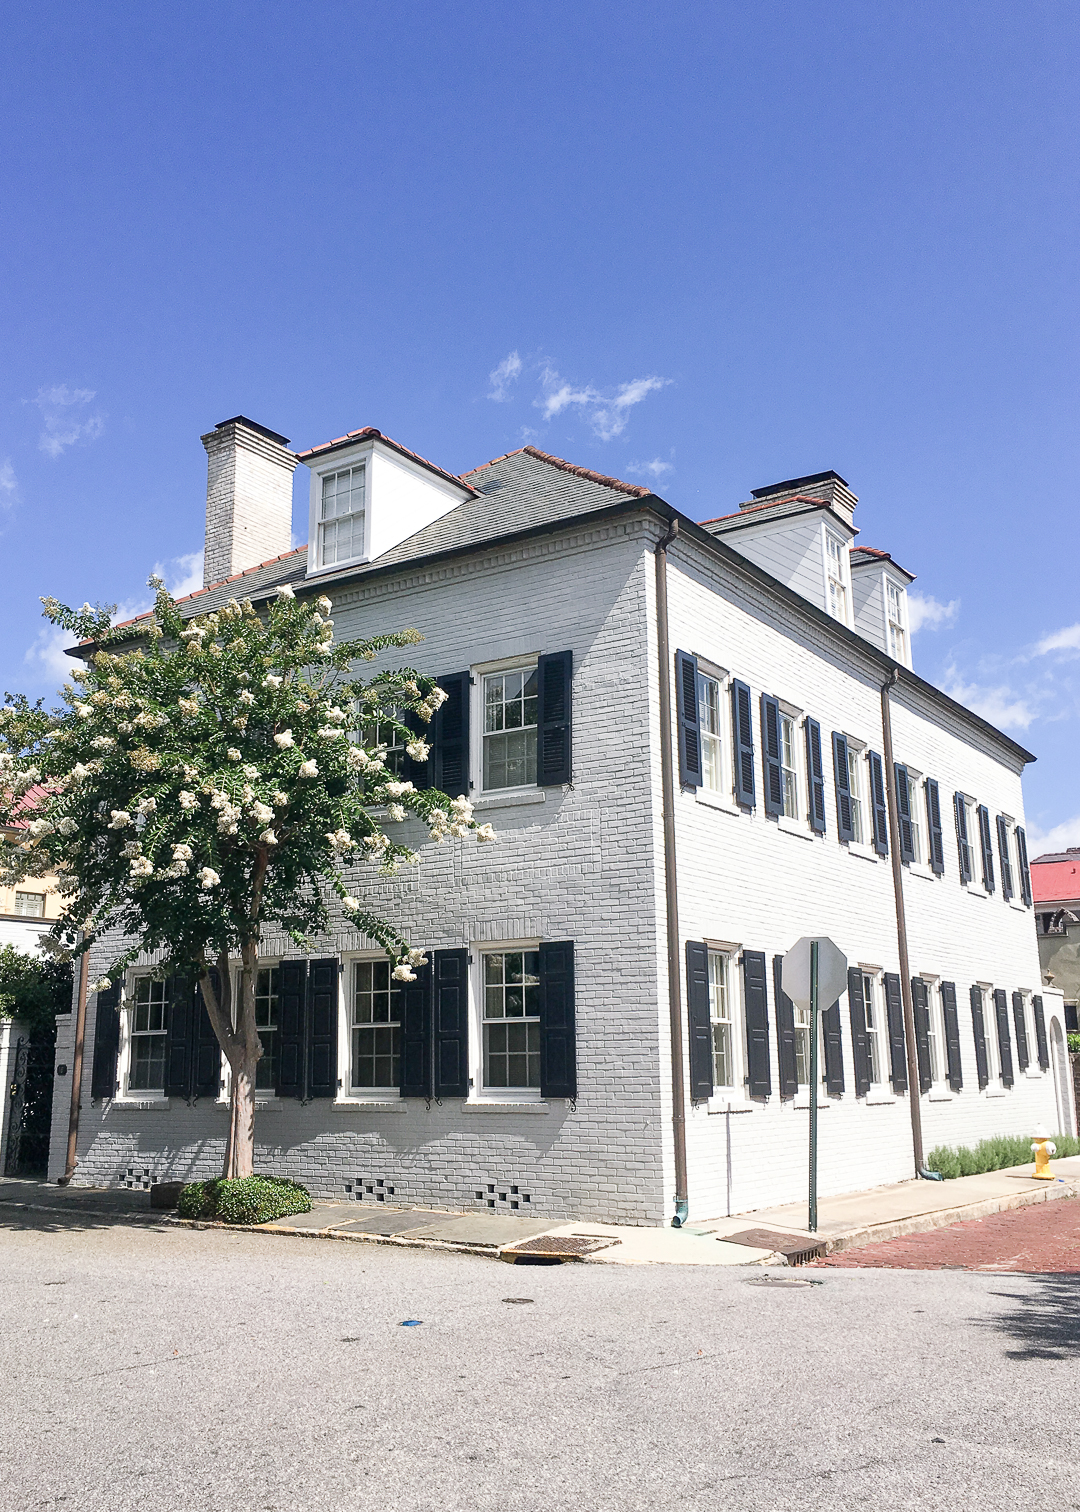 southern charm in buildings 